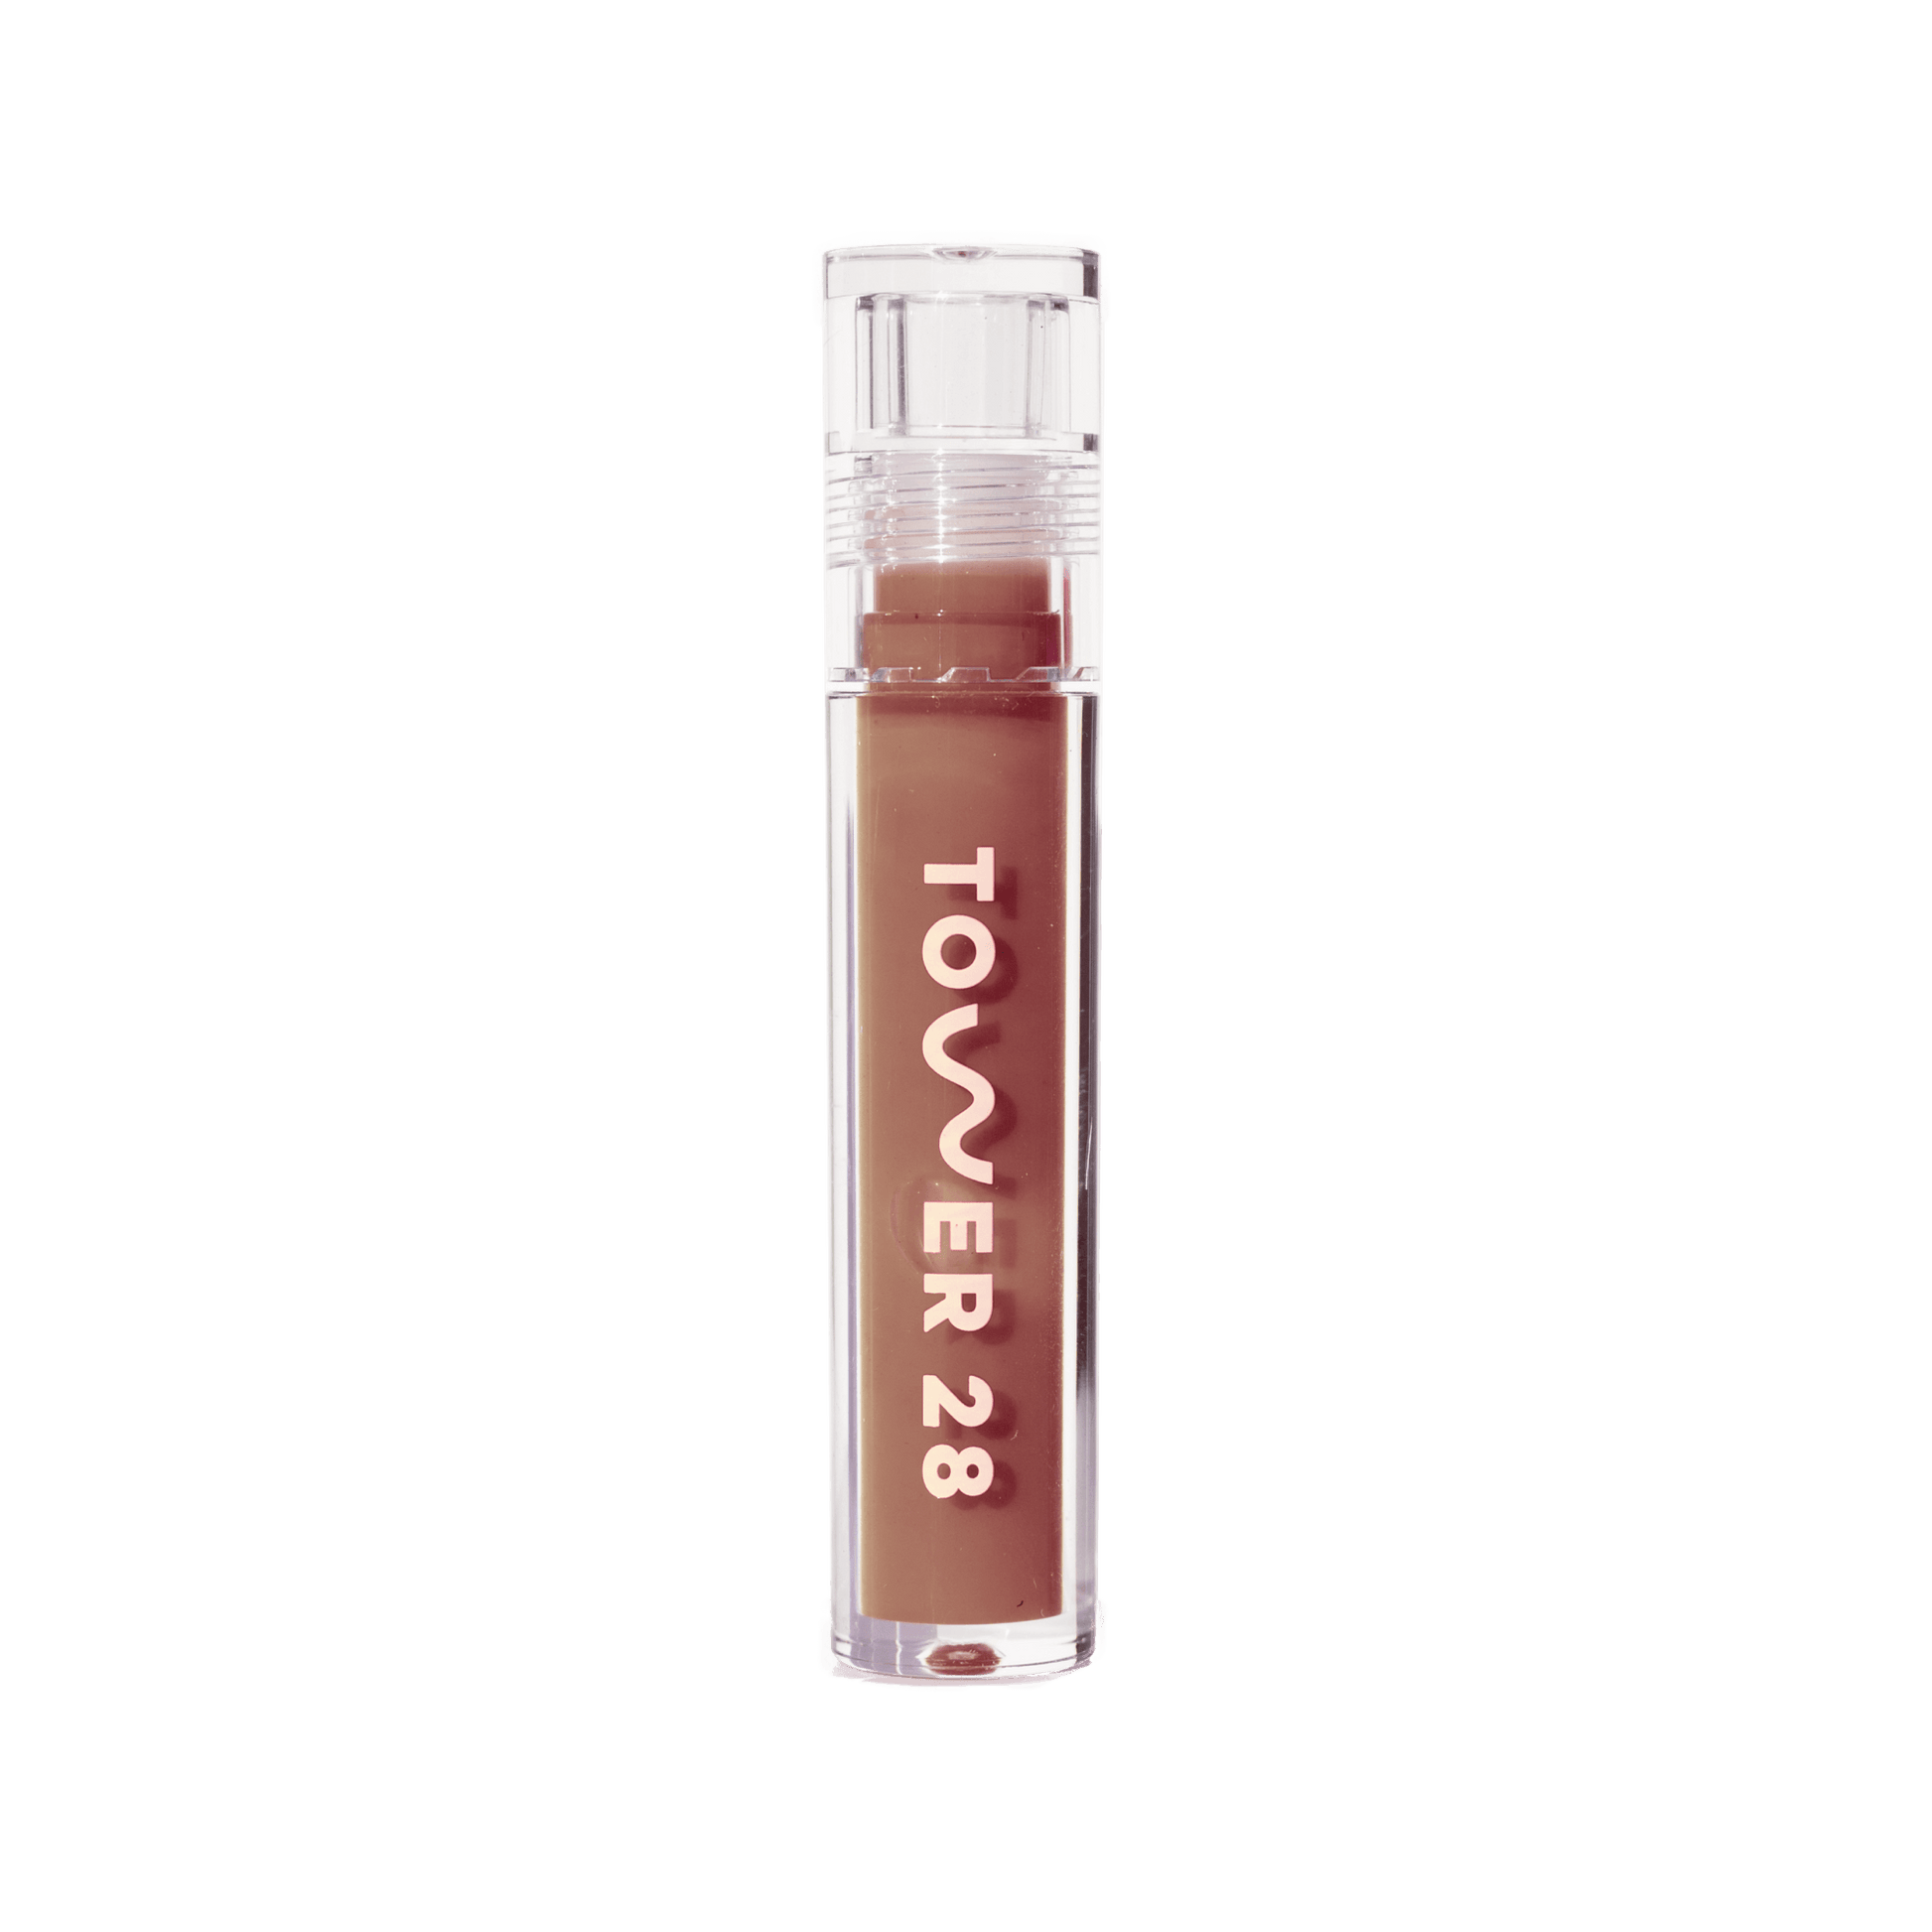 The Tower 28 Beauty ShineOn Lip Jelly in the shade Almond